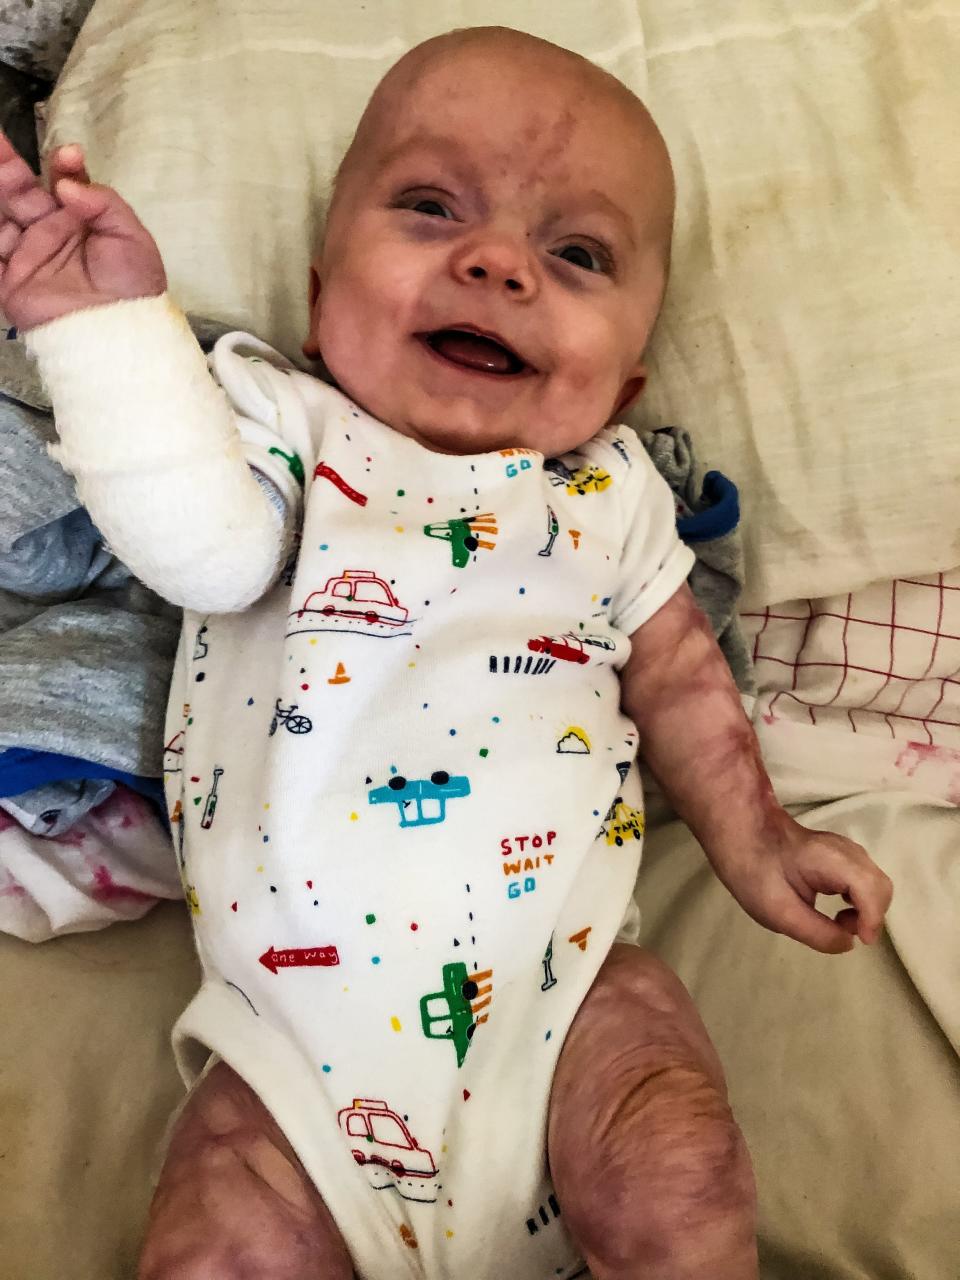 Little Kaiden is now six months old and happier than ever! [Photo: SWNS]